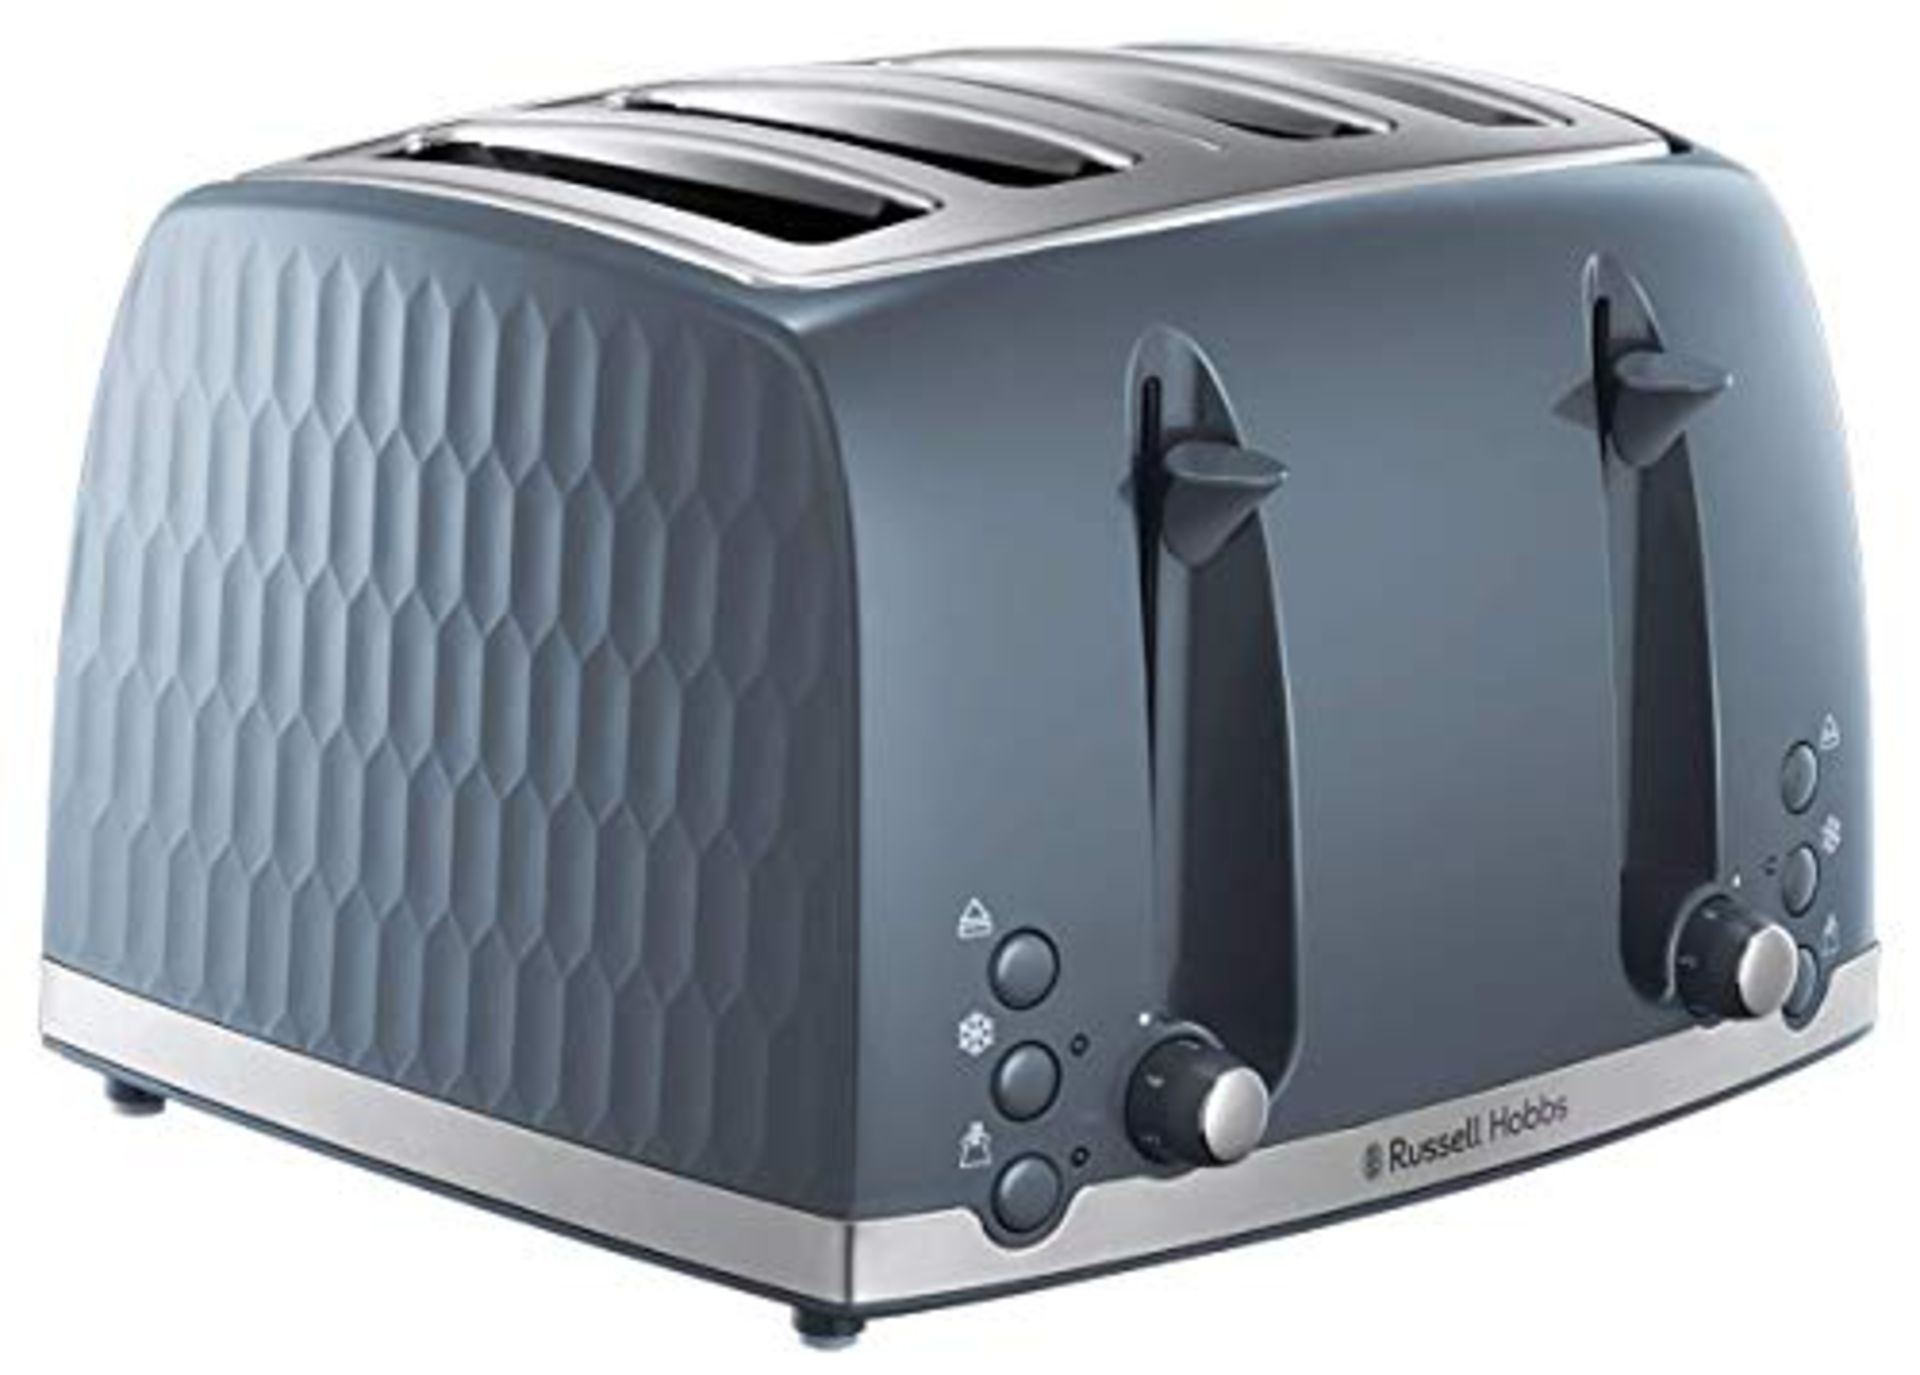 Russell Hobbs 26073 4 Slice Toaster - Contemporary Honeycomb Design with Extra Wide Sl